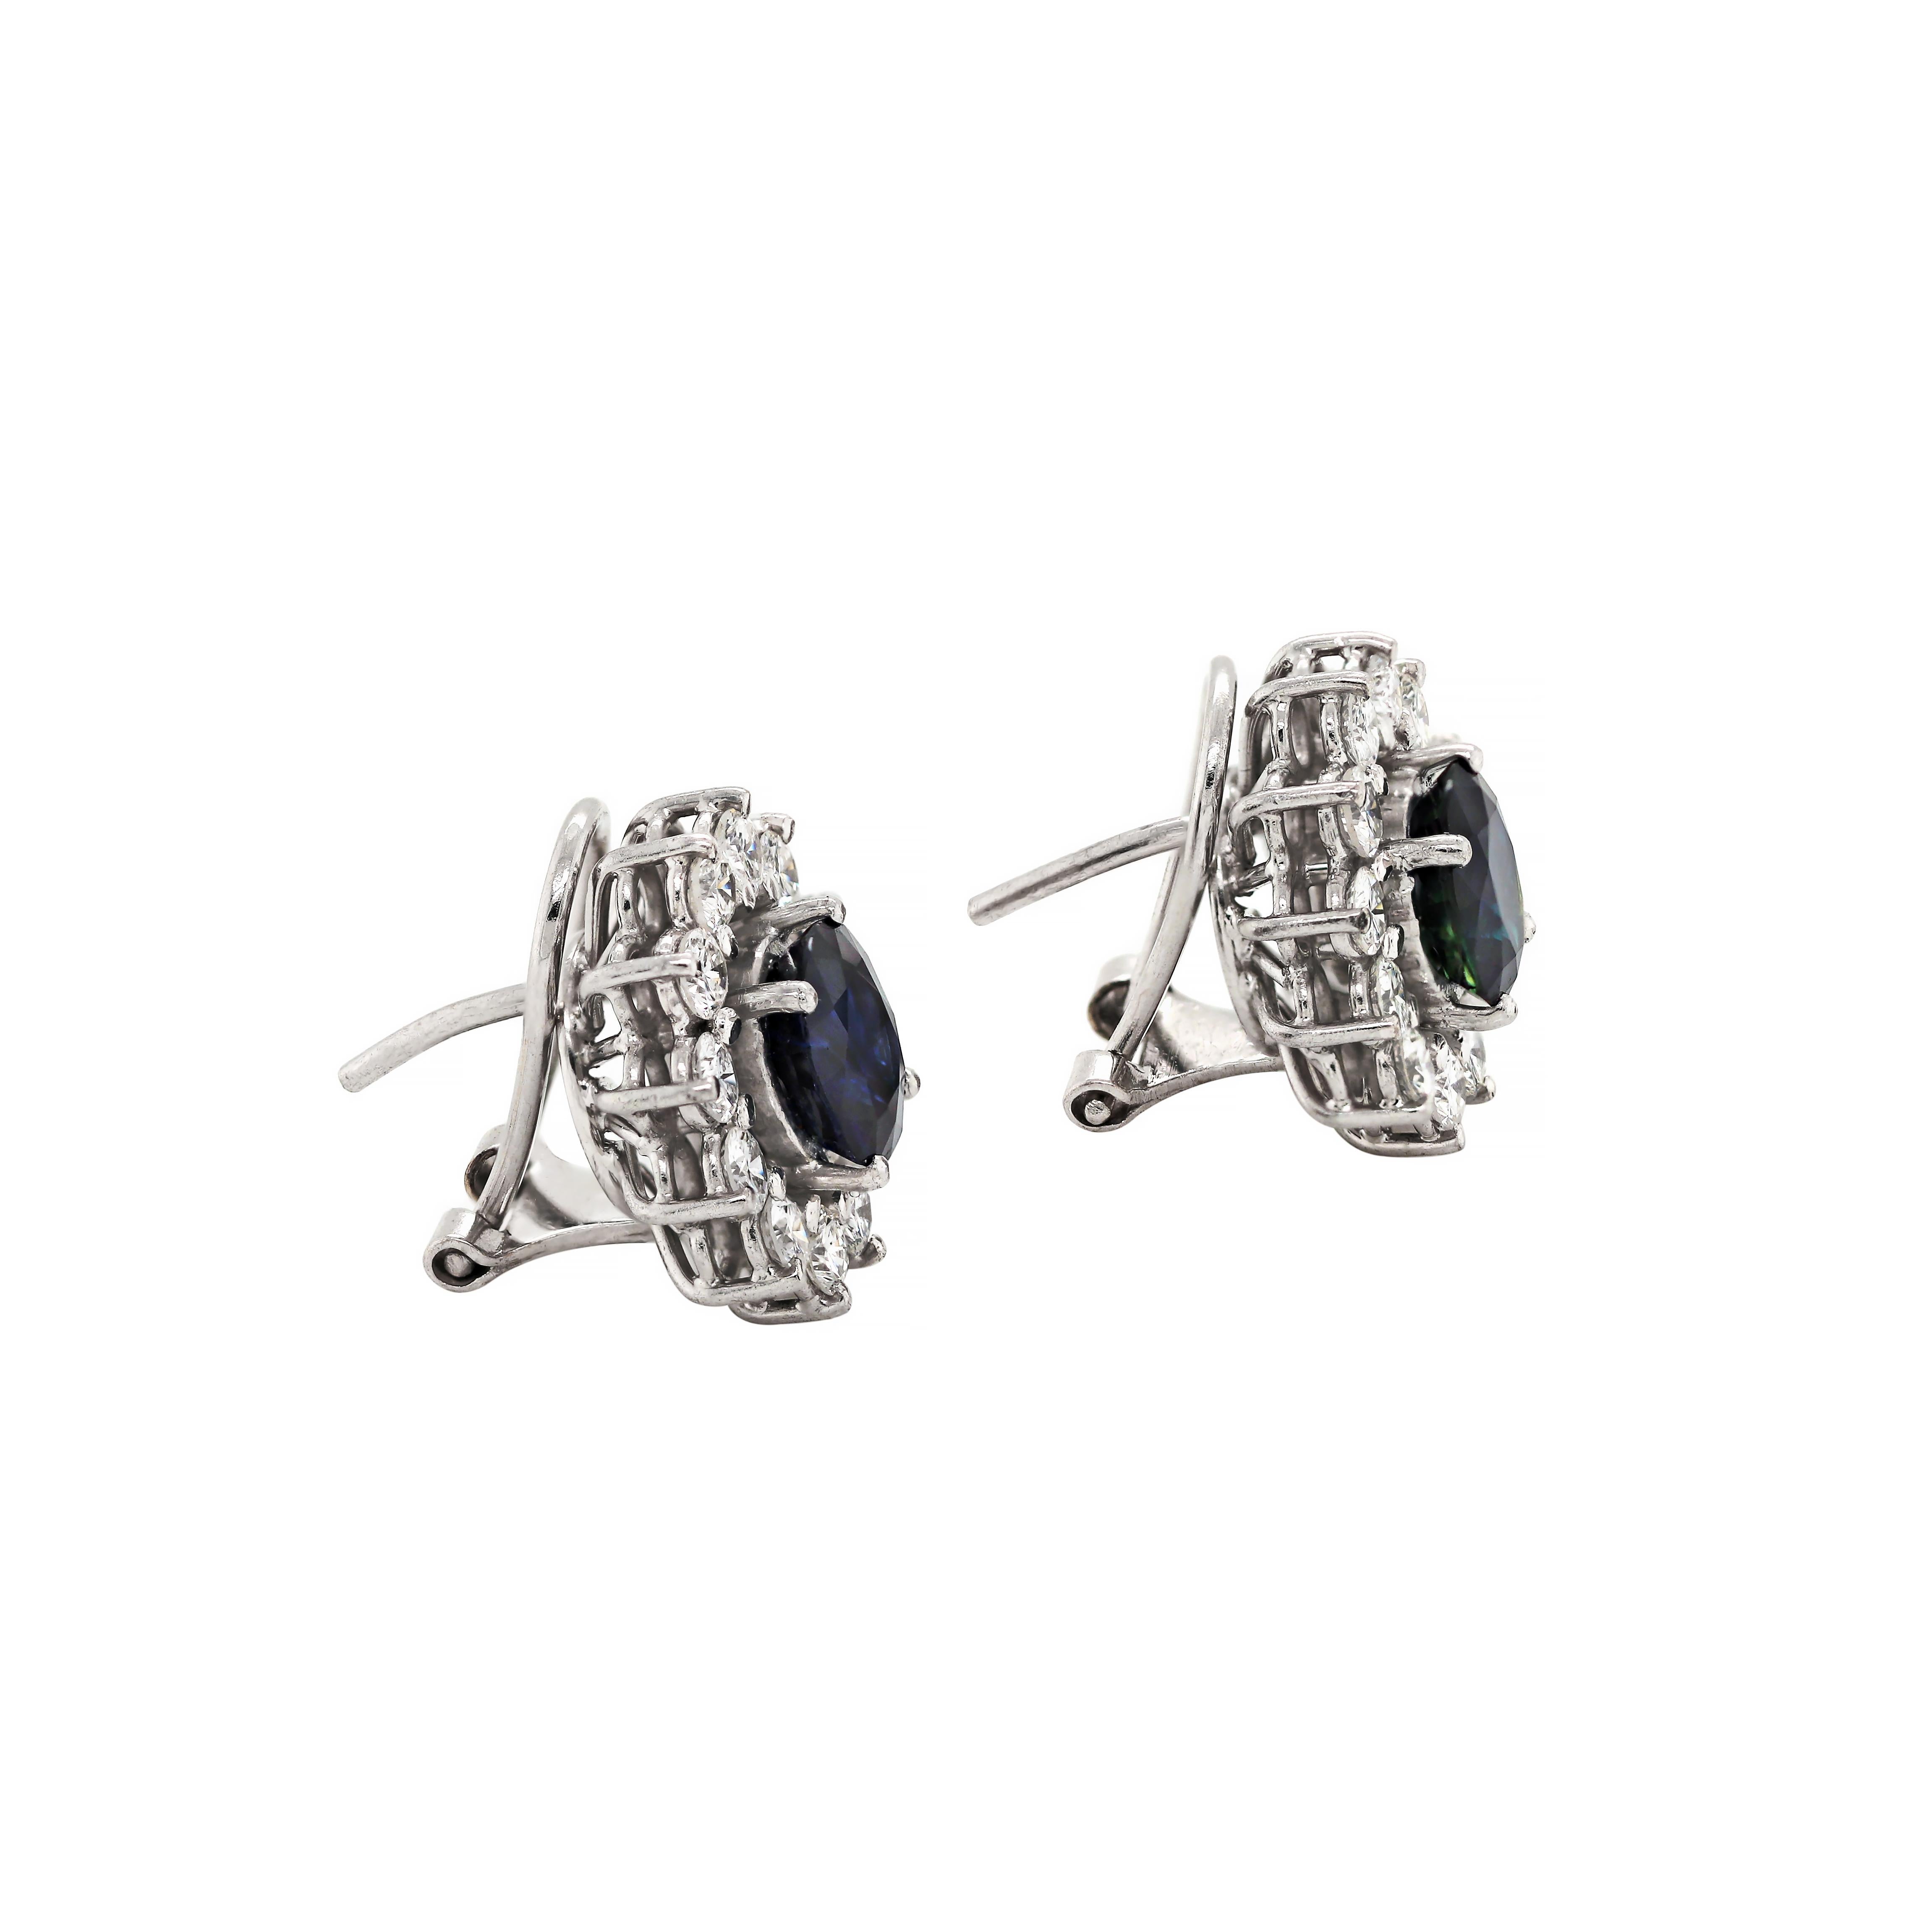 These classic cluster earrings feature an oval natural blue sapphire mounted in open back, four claw settings, weighing an approximate combined weight of 4.50ct. The sapphires are beautifully surrounded by 12 round brilliant cut diamonds, also claw